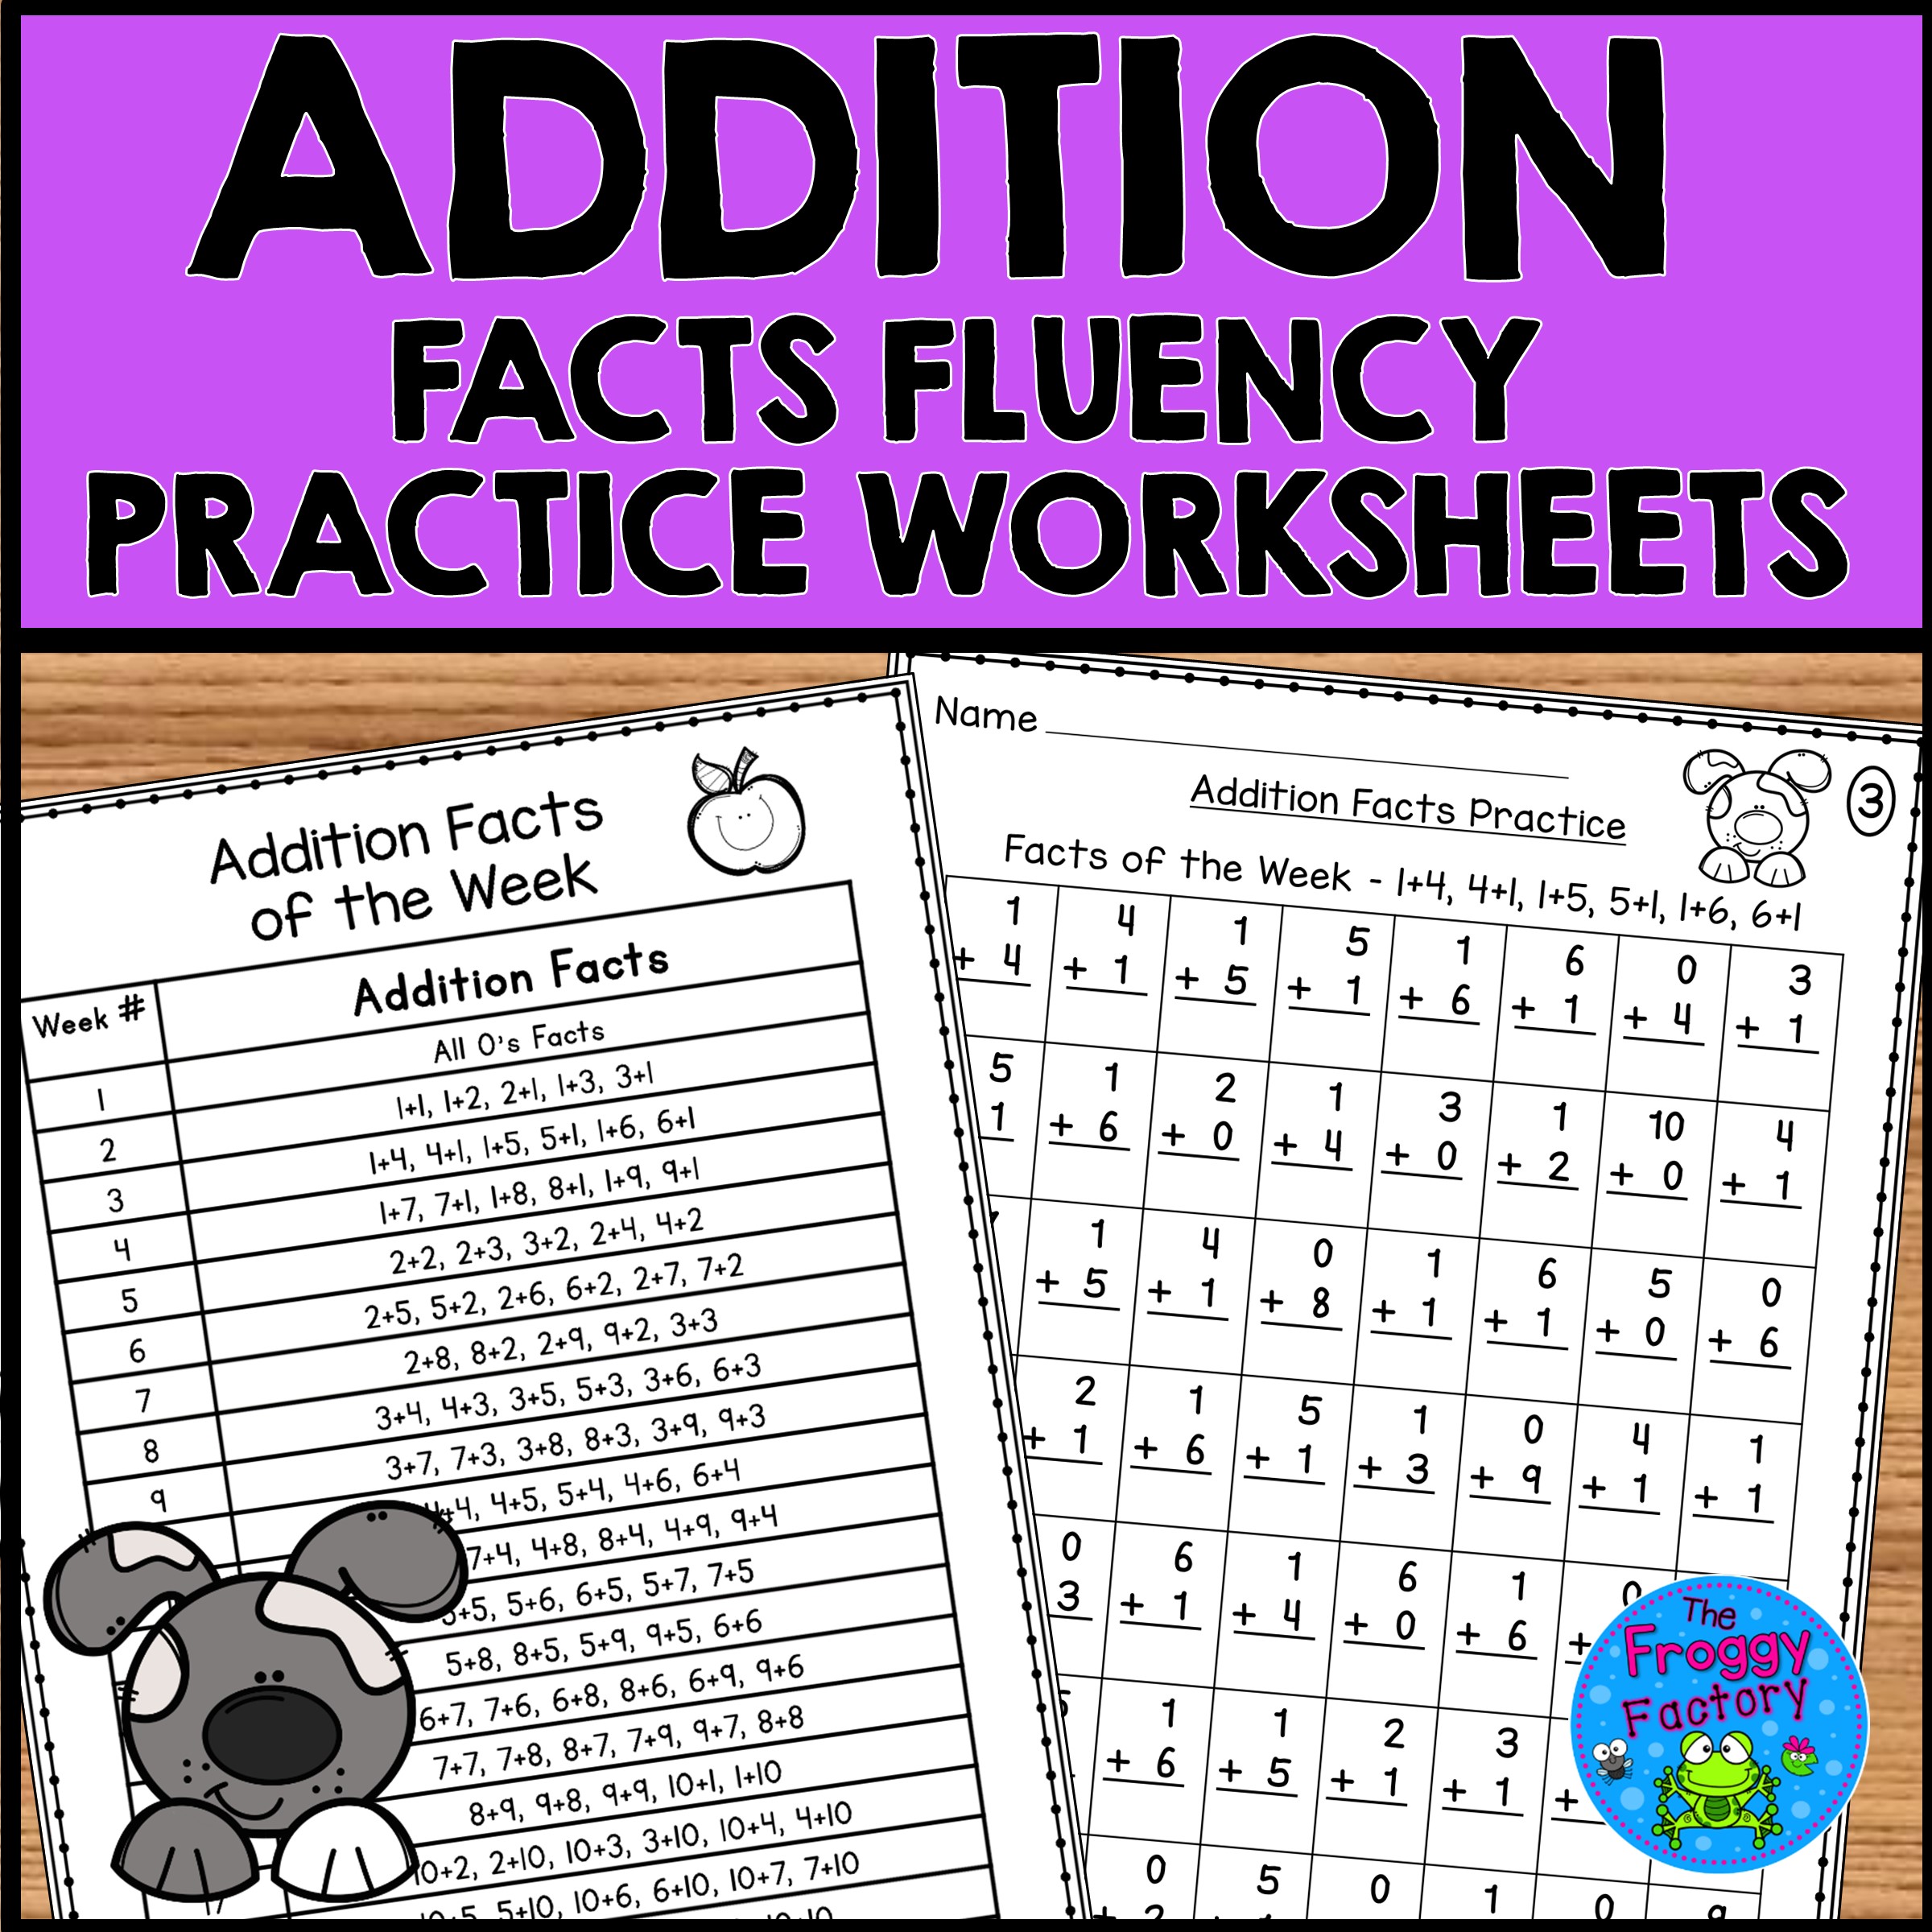 Addition Facts Practice Worksheets | Addition Fact Fluency